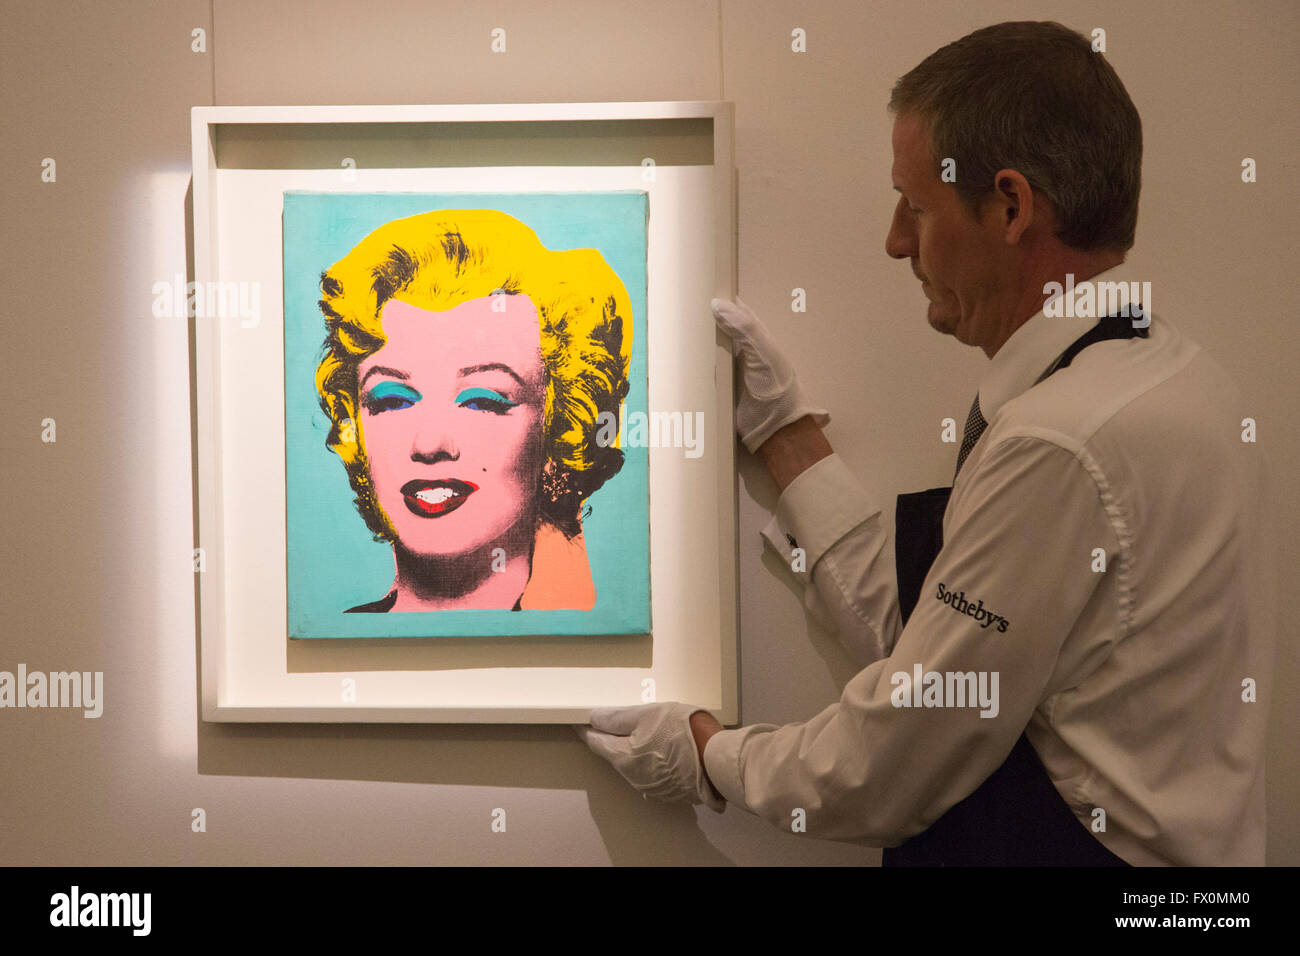 London, UK. 8 April 2016. A Sotheby's employee handles the artwork Warhol's Marilyn Monroe, 1967, by Elaine Sturtevant, known as the Queen of Copycats. Estimate: USD 300,000-400,000.  Sotheby's London Auction Preview of art from the Contemporary Art Evening Auction in New York on 11 May 2016. Stock Photo